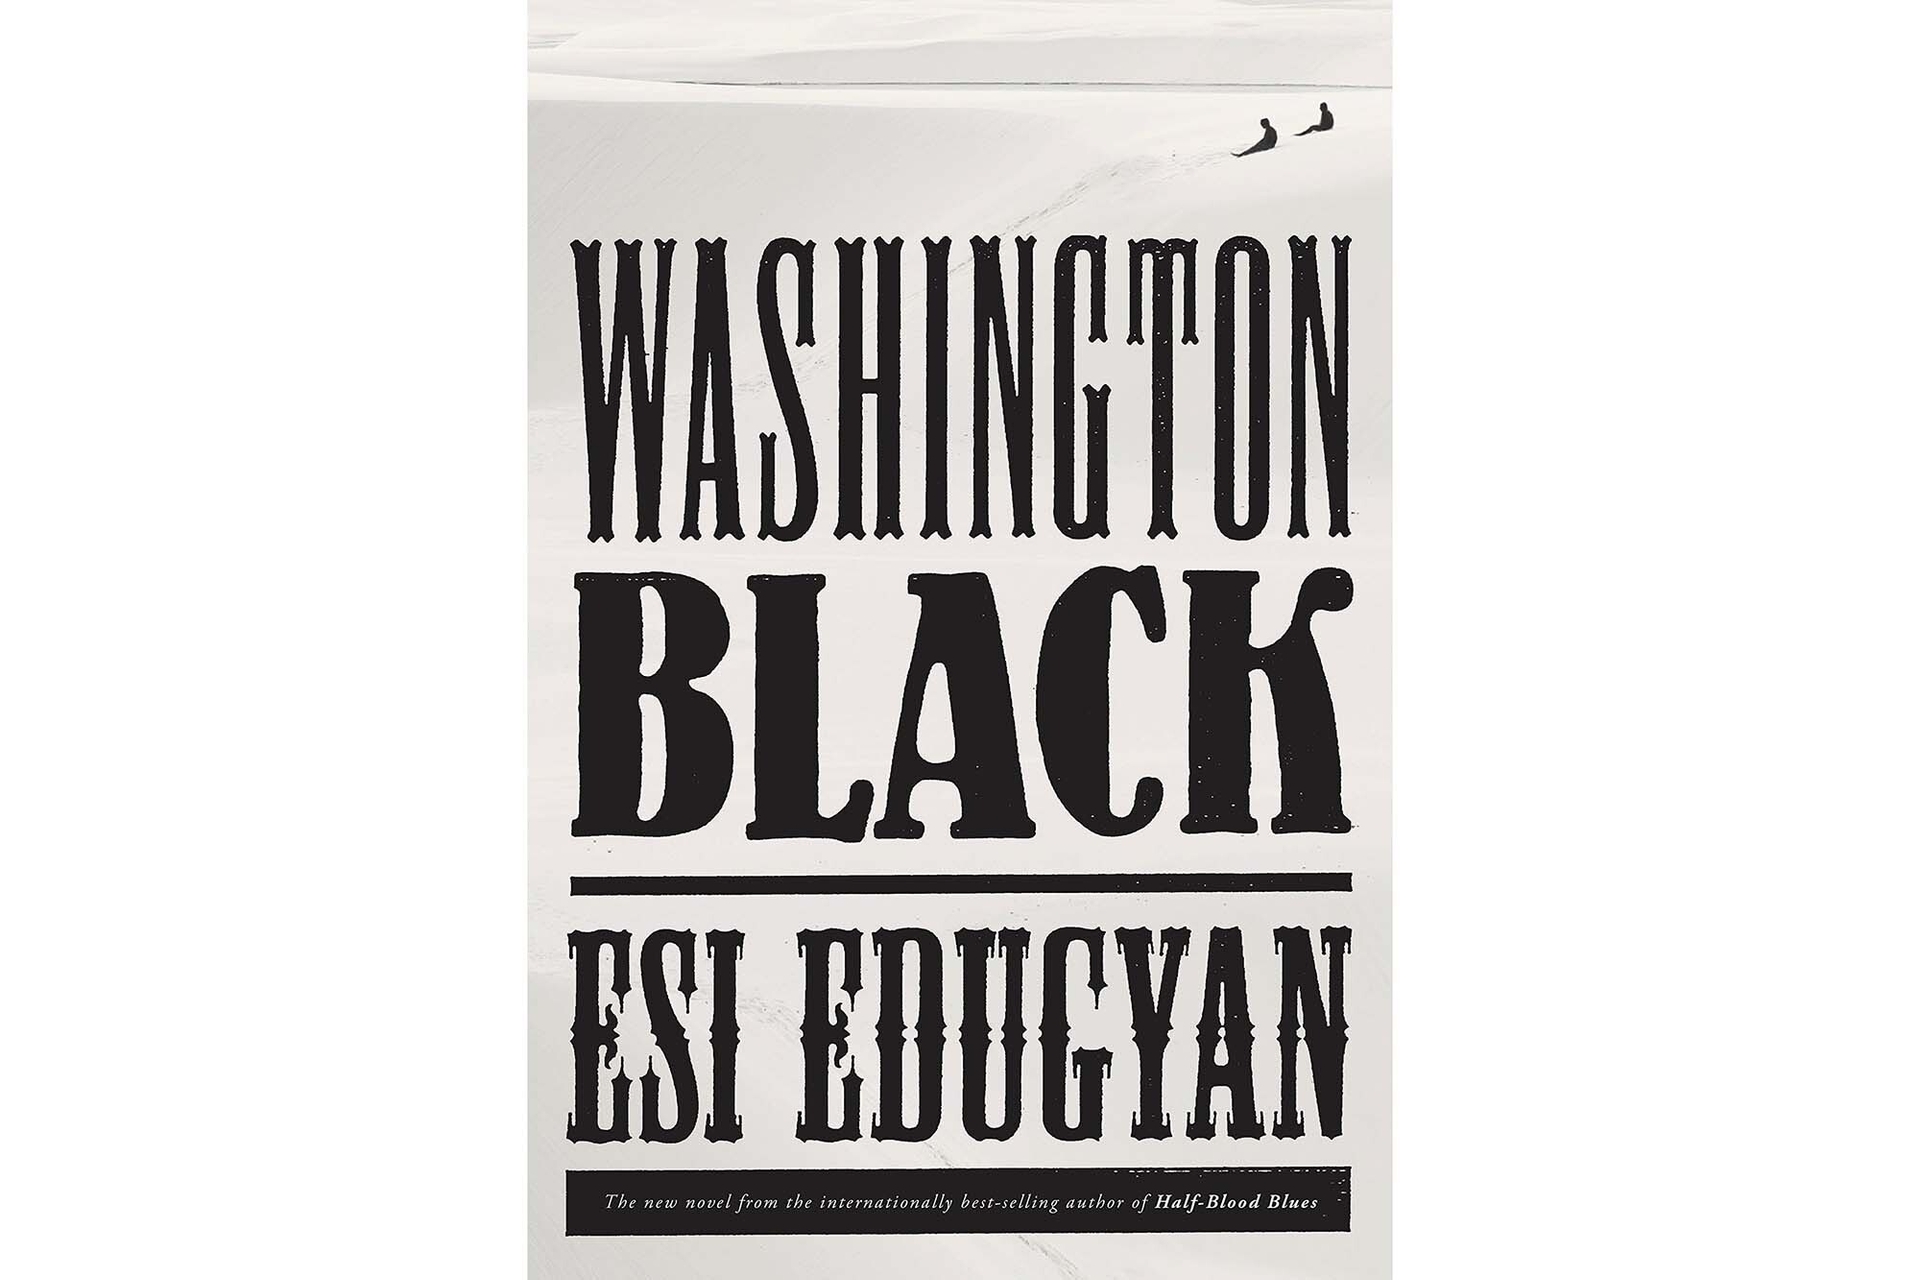 Best books of the year #2 pick, "Washington Black" by Esi Edugyan. The book cover has an off-white background with old-time all-caps font for the title and author's name.  In the top right corner, are two figures who appear to be sitting on a sand dune.